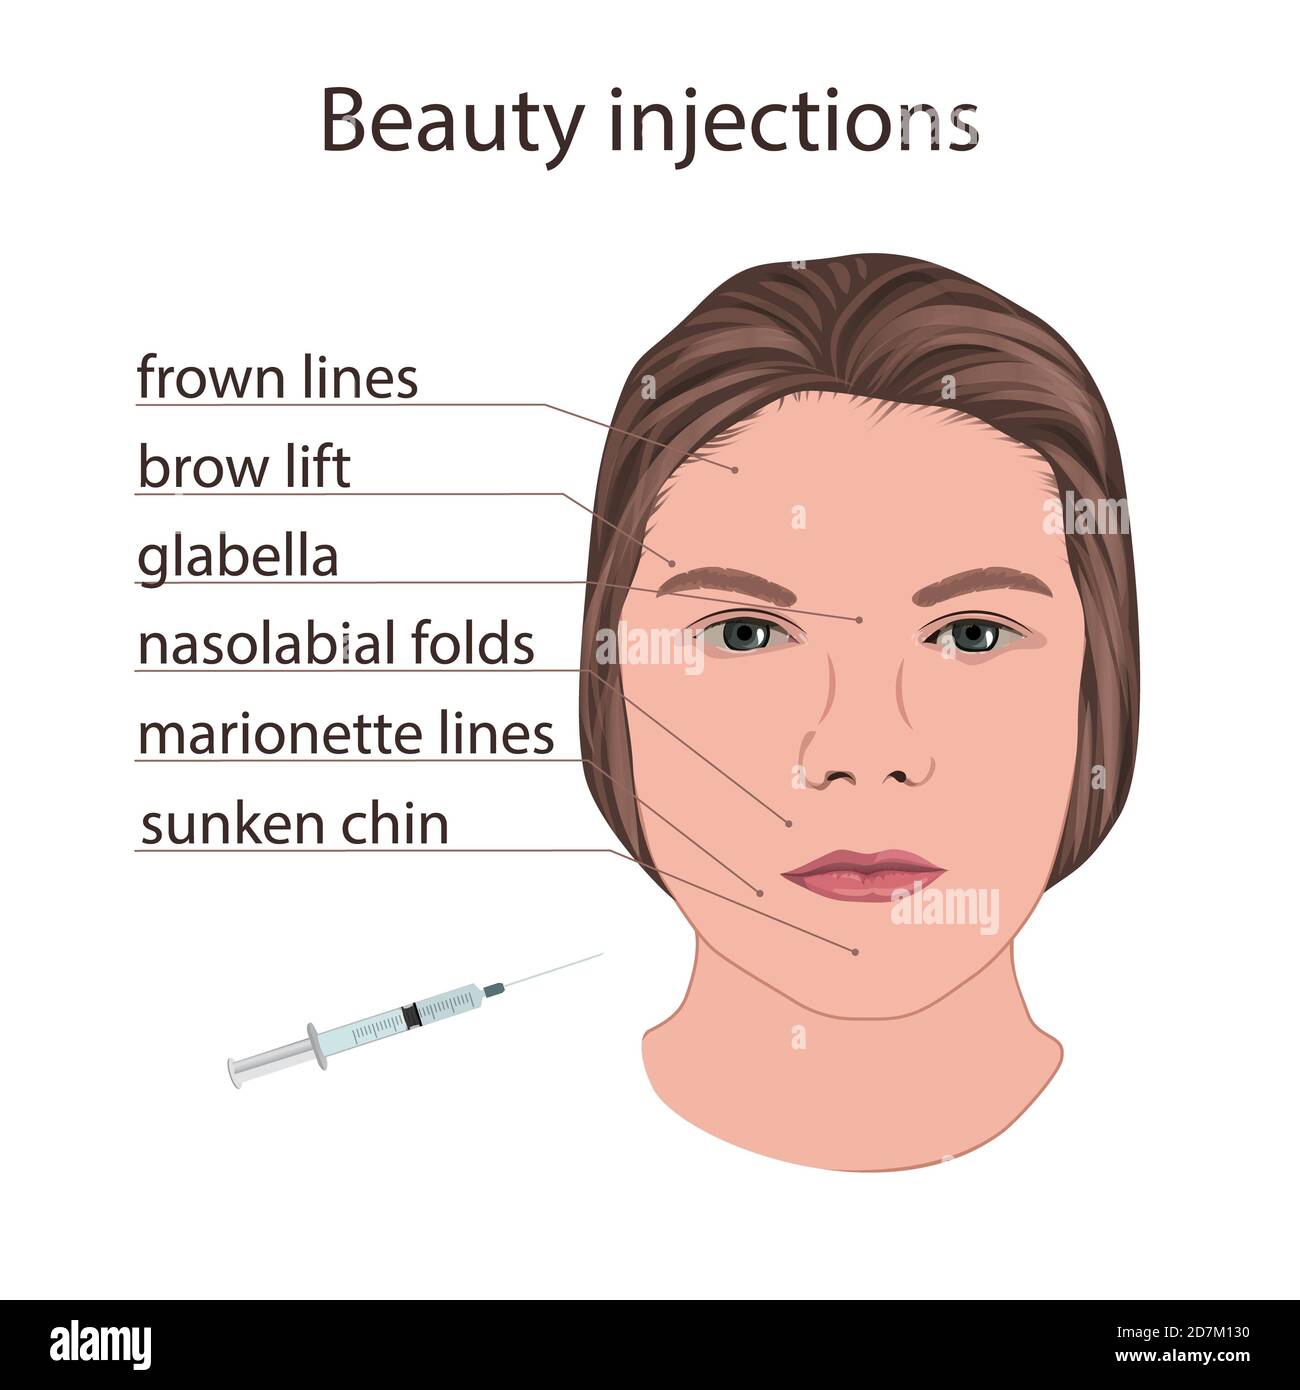 Scheme for beauty injections, illustration. Stock Photo